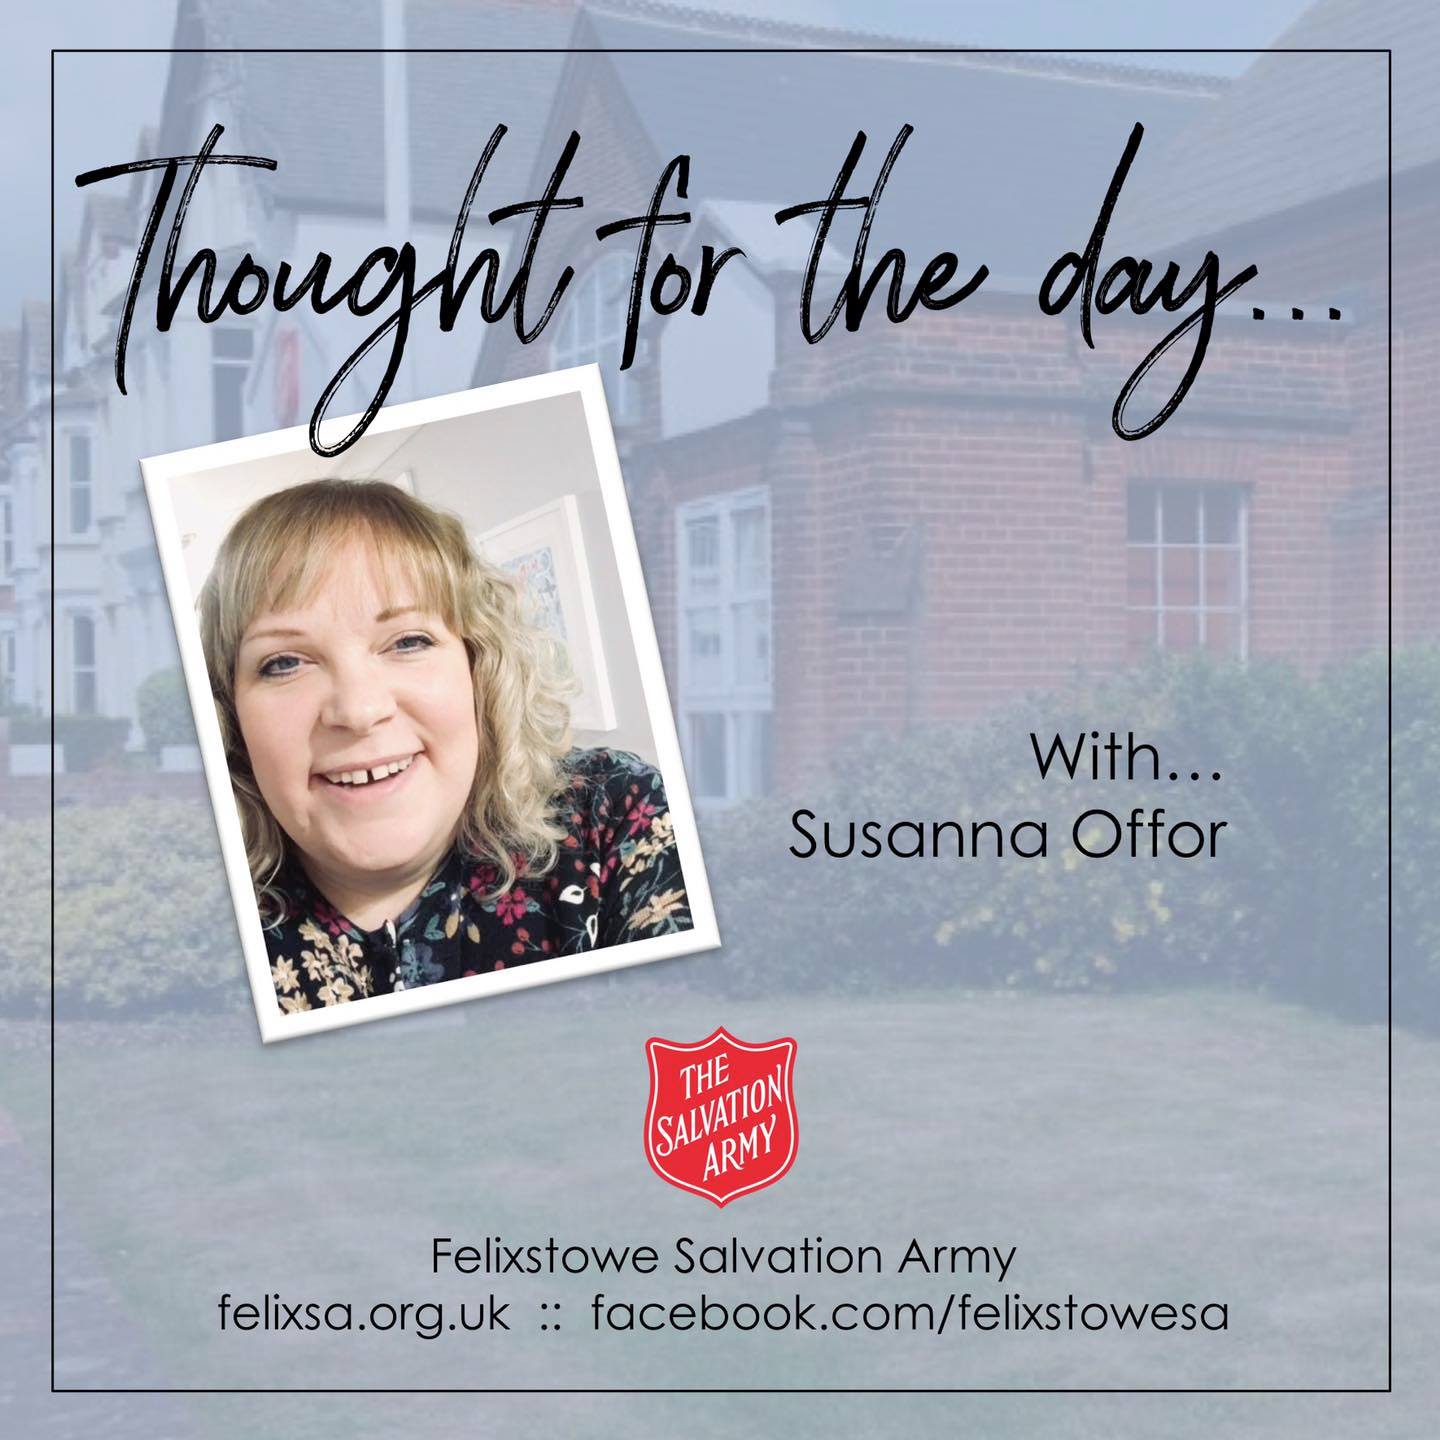 Thought for the Day with Susanna Offor